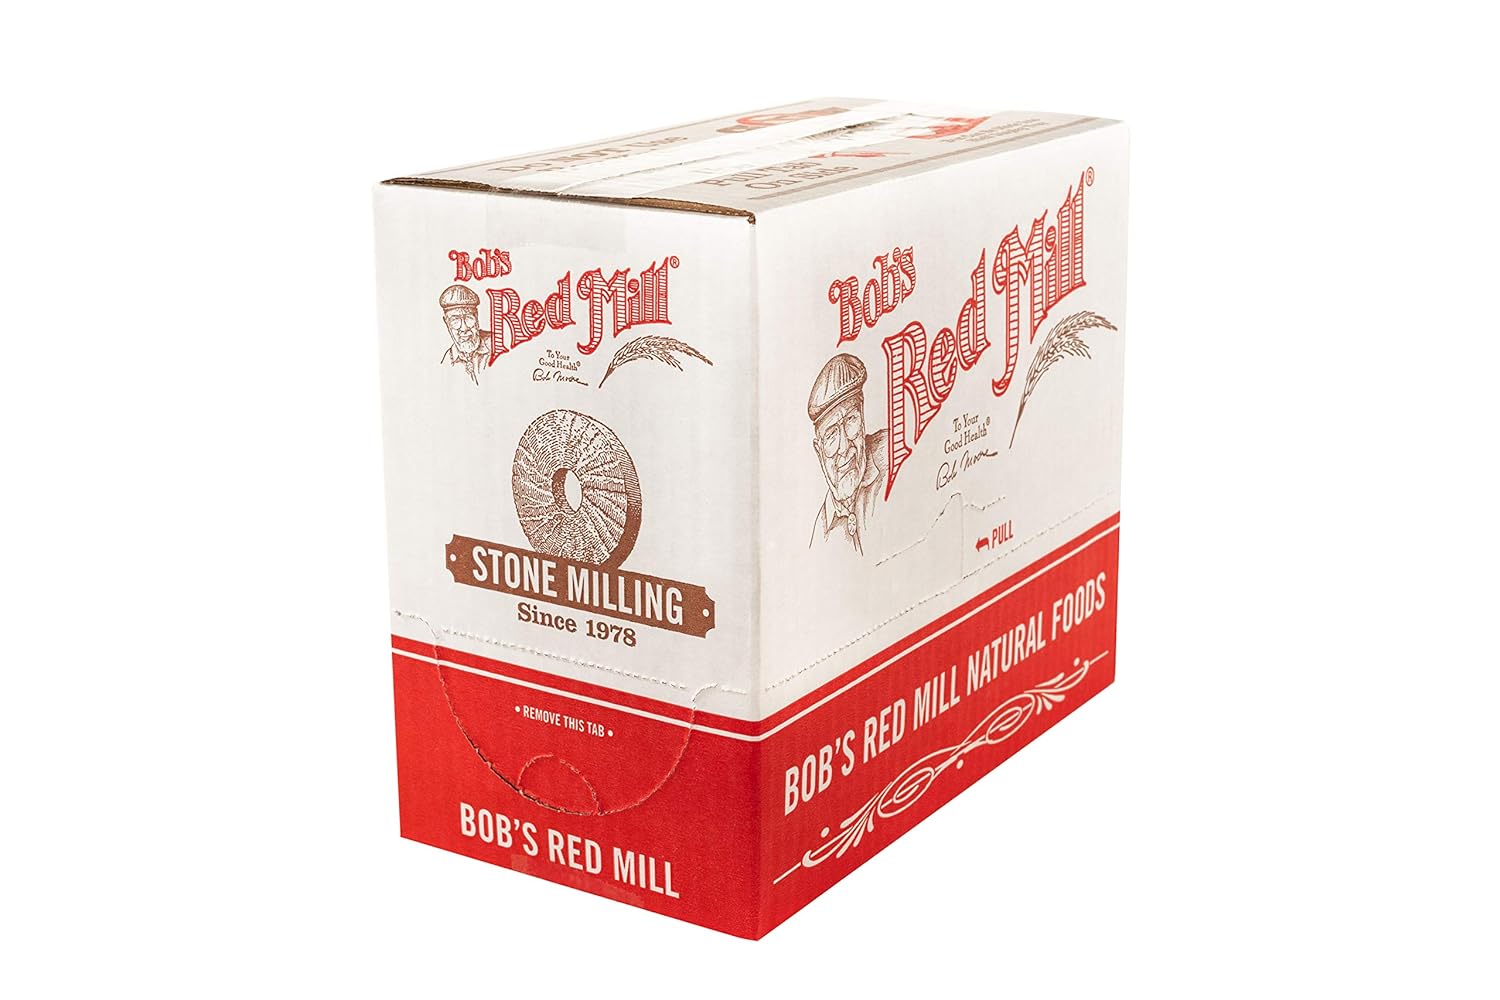 Bob's Red Mill Whole Grain Oat Flour: A Nutritious and Versatile Baking Ingredient